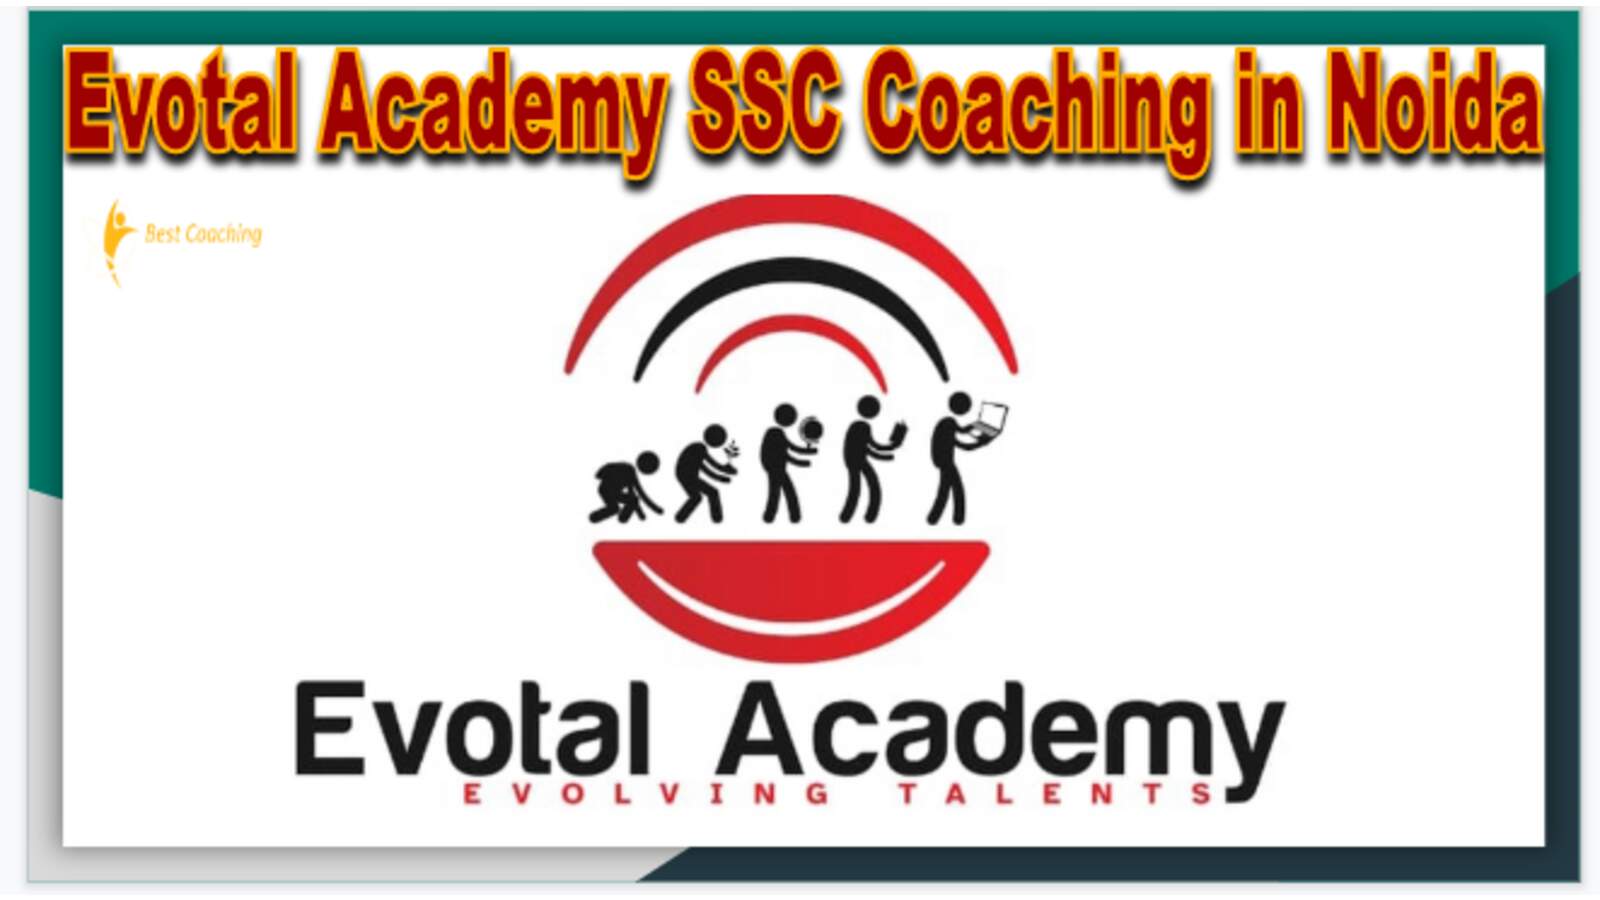 Evotal Academy SSC Coaching in Noida